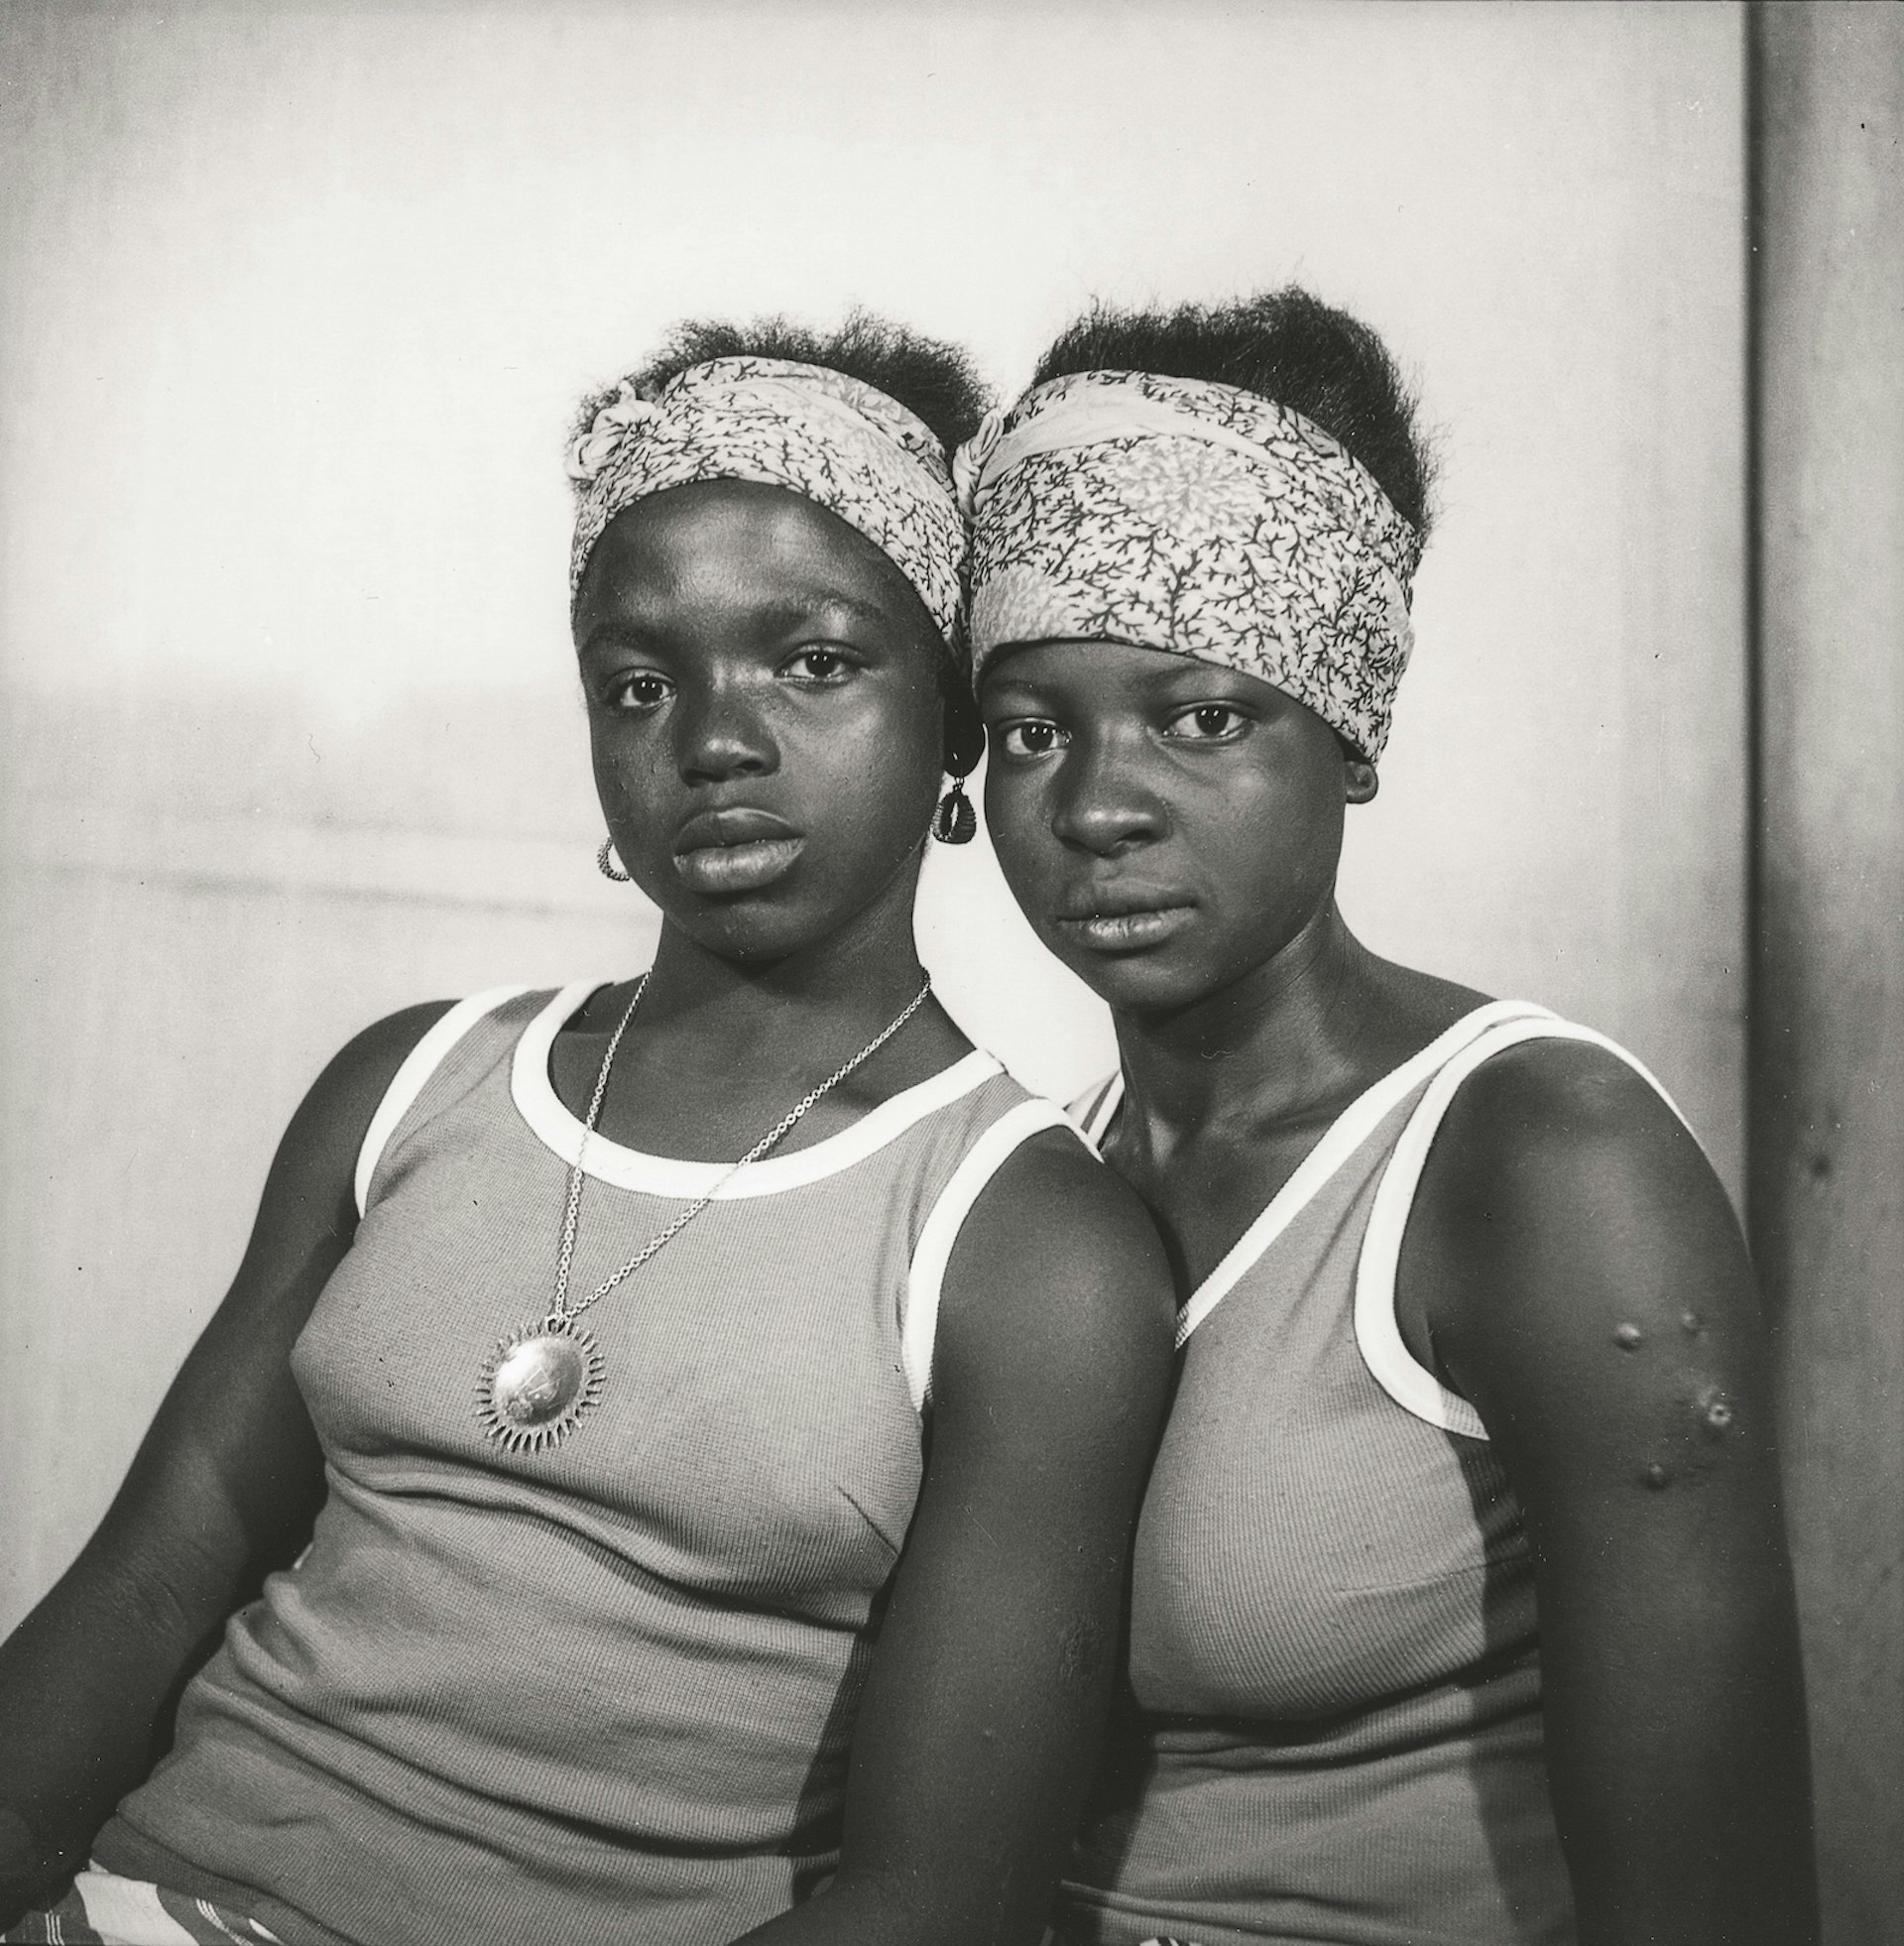 Malick Sidibé: Iconic portraits of African youth culture